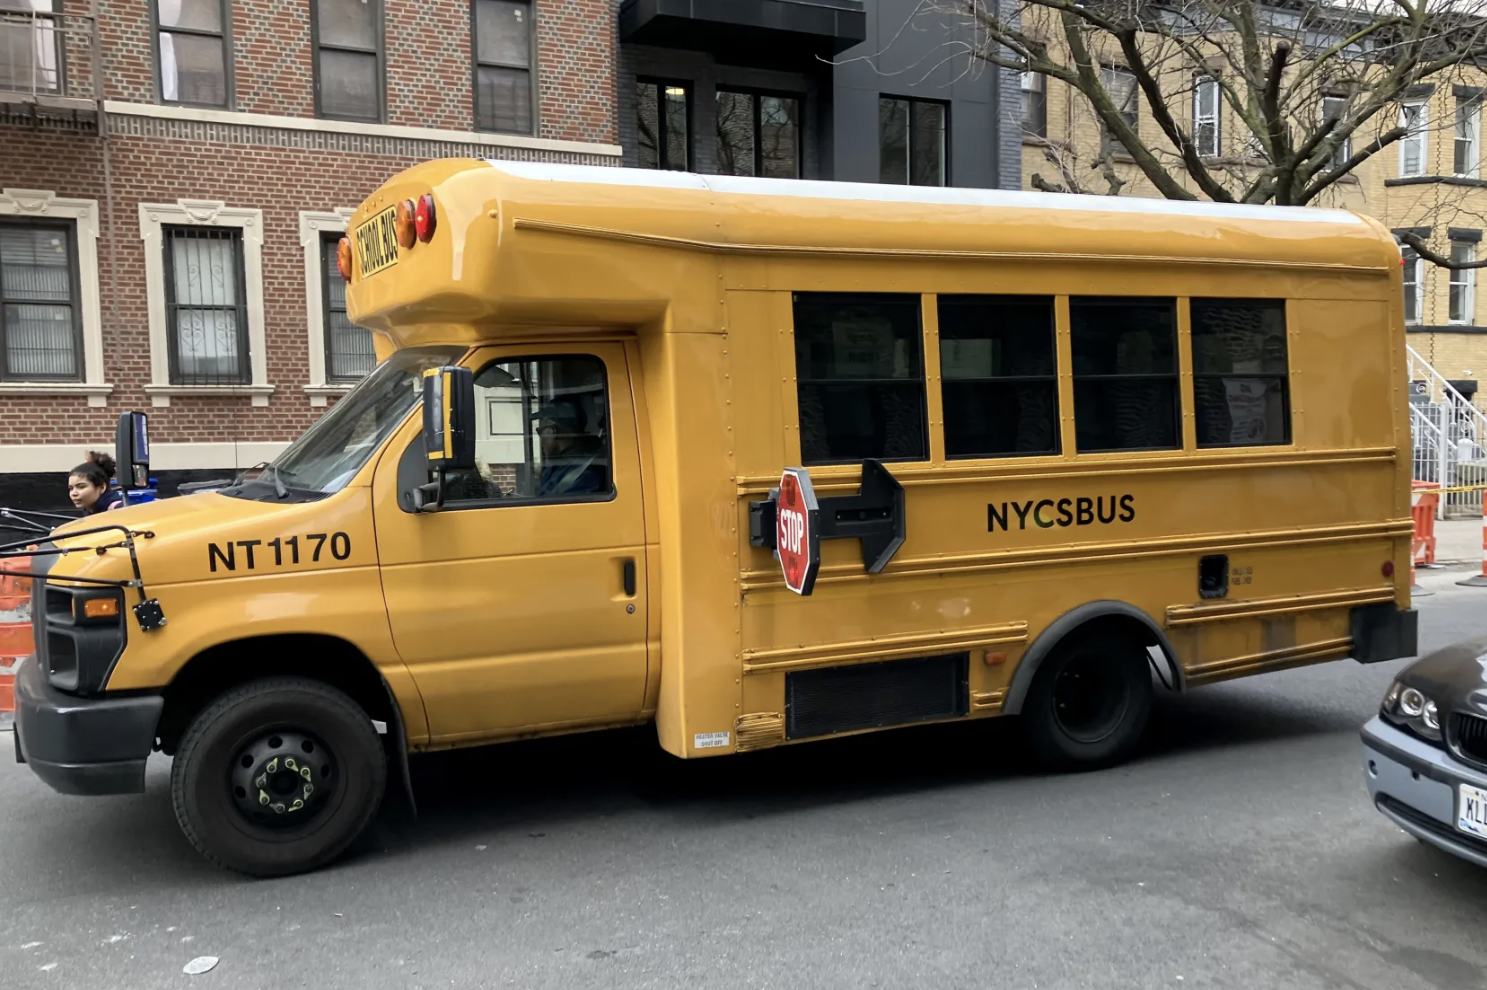 NYC school bus service will run uninterrupted next week, despite looming strike: union official